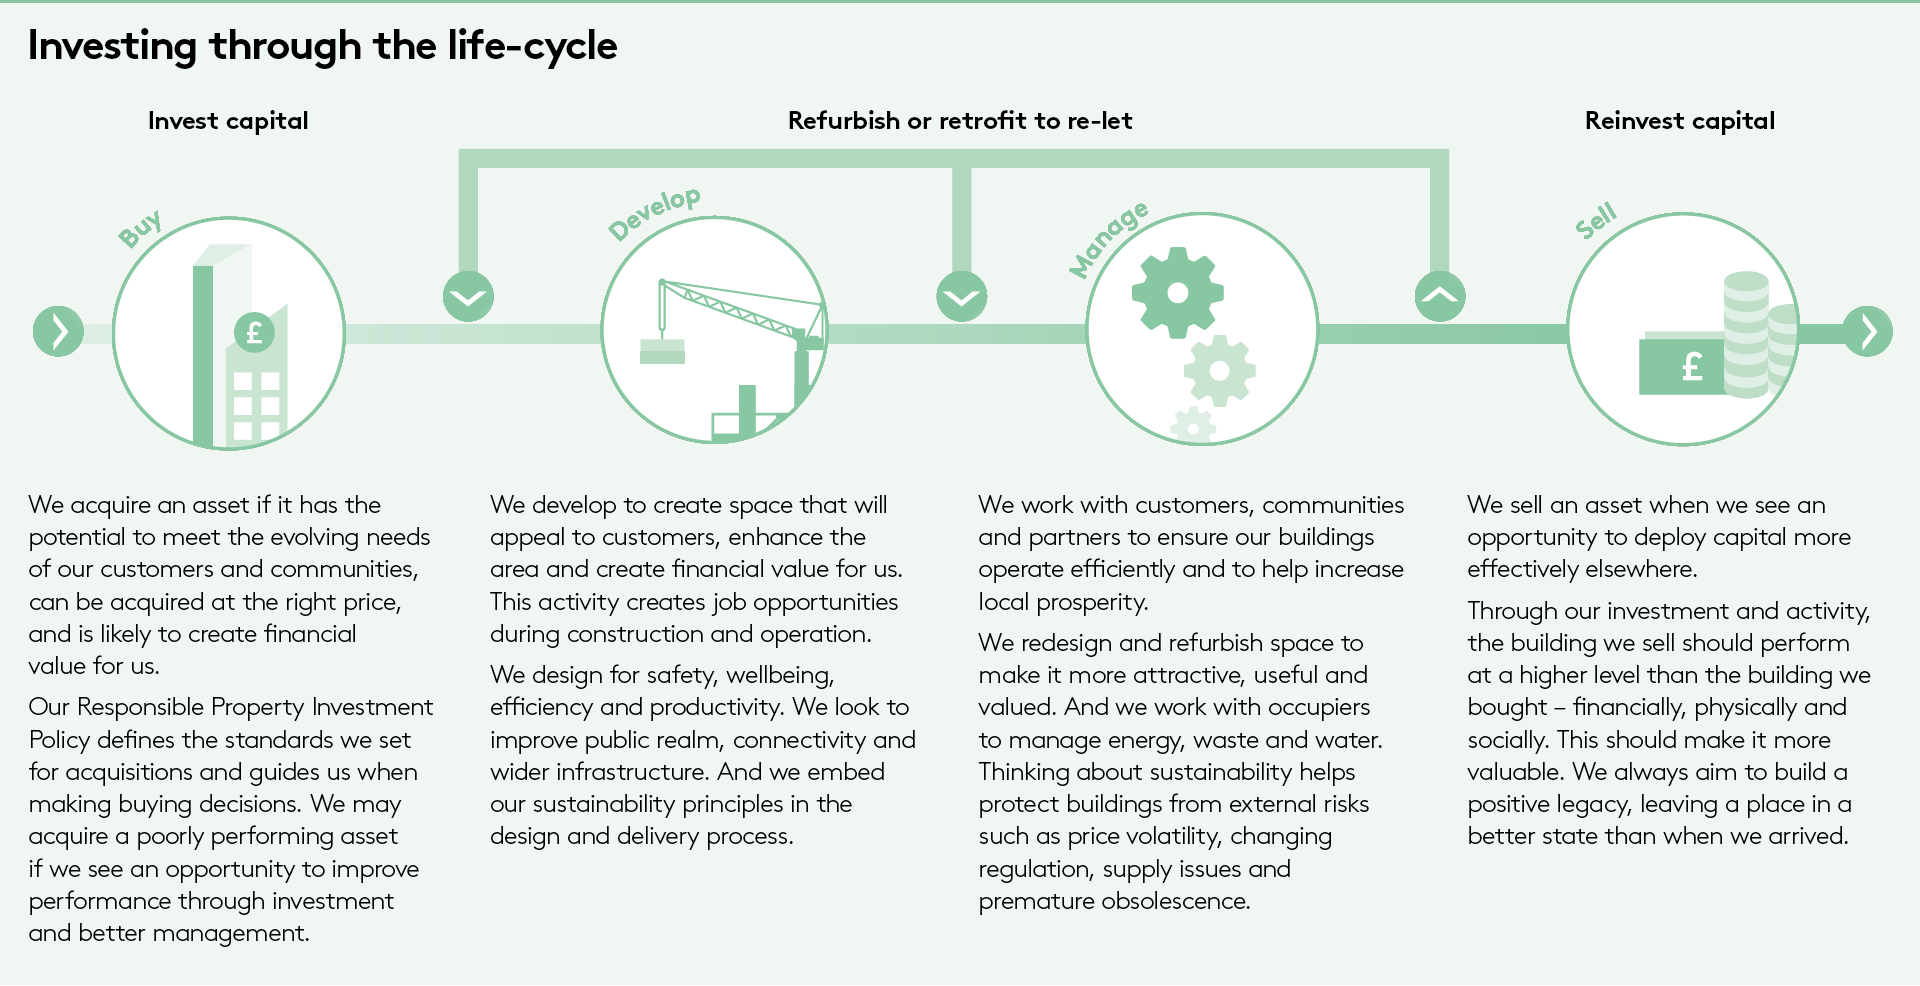 Investing through the life-cycle